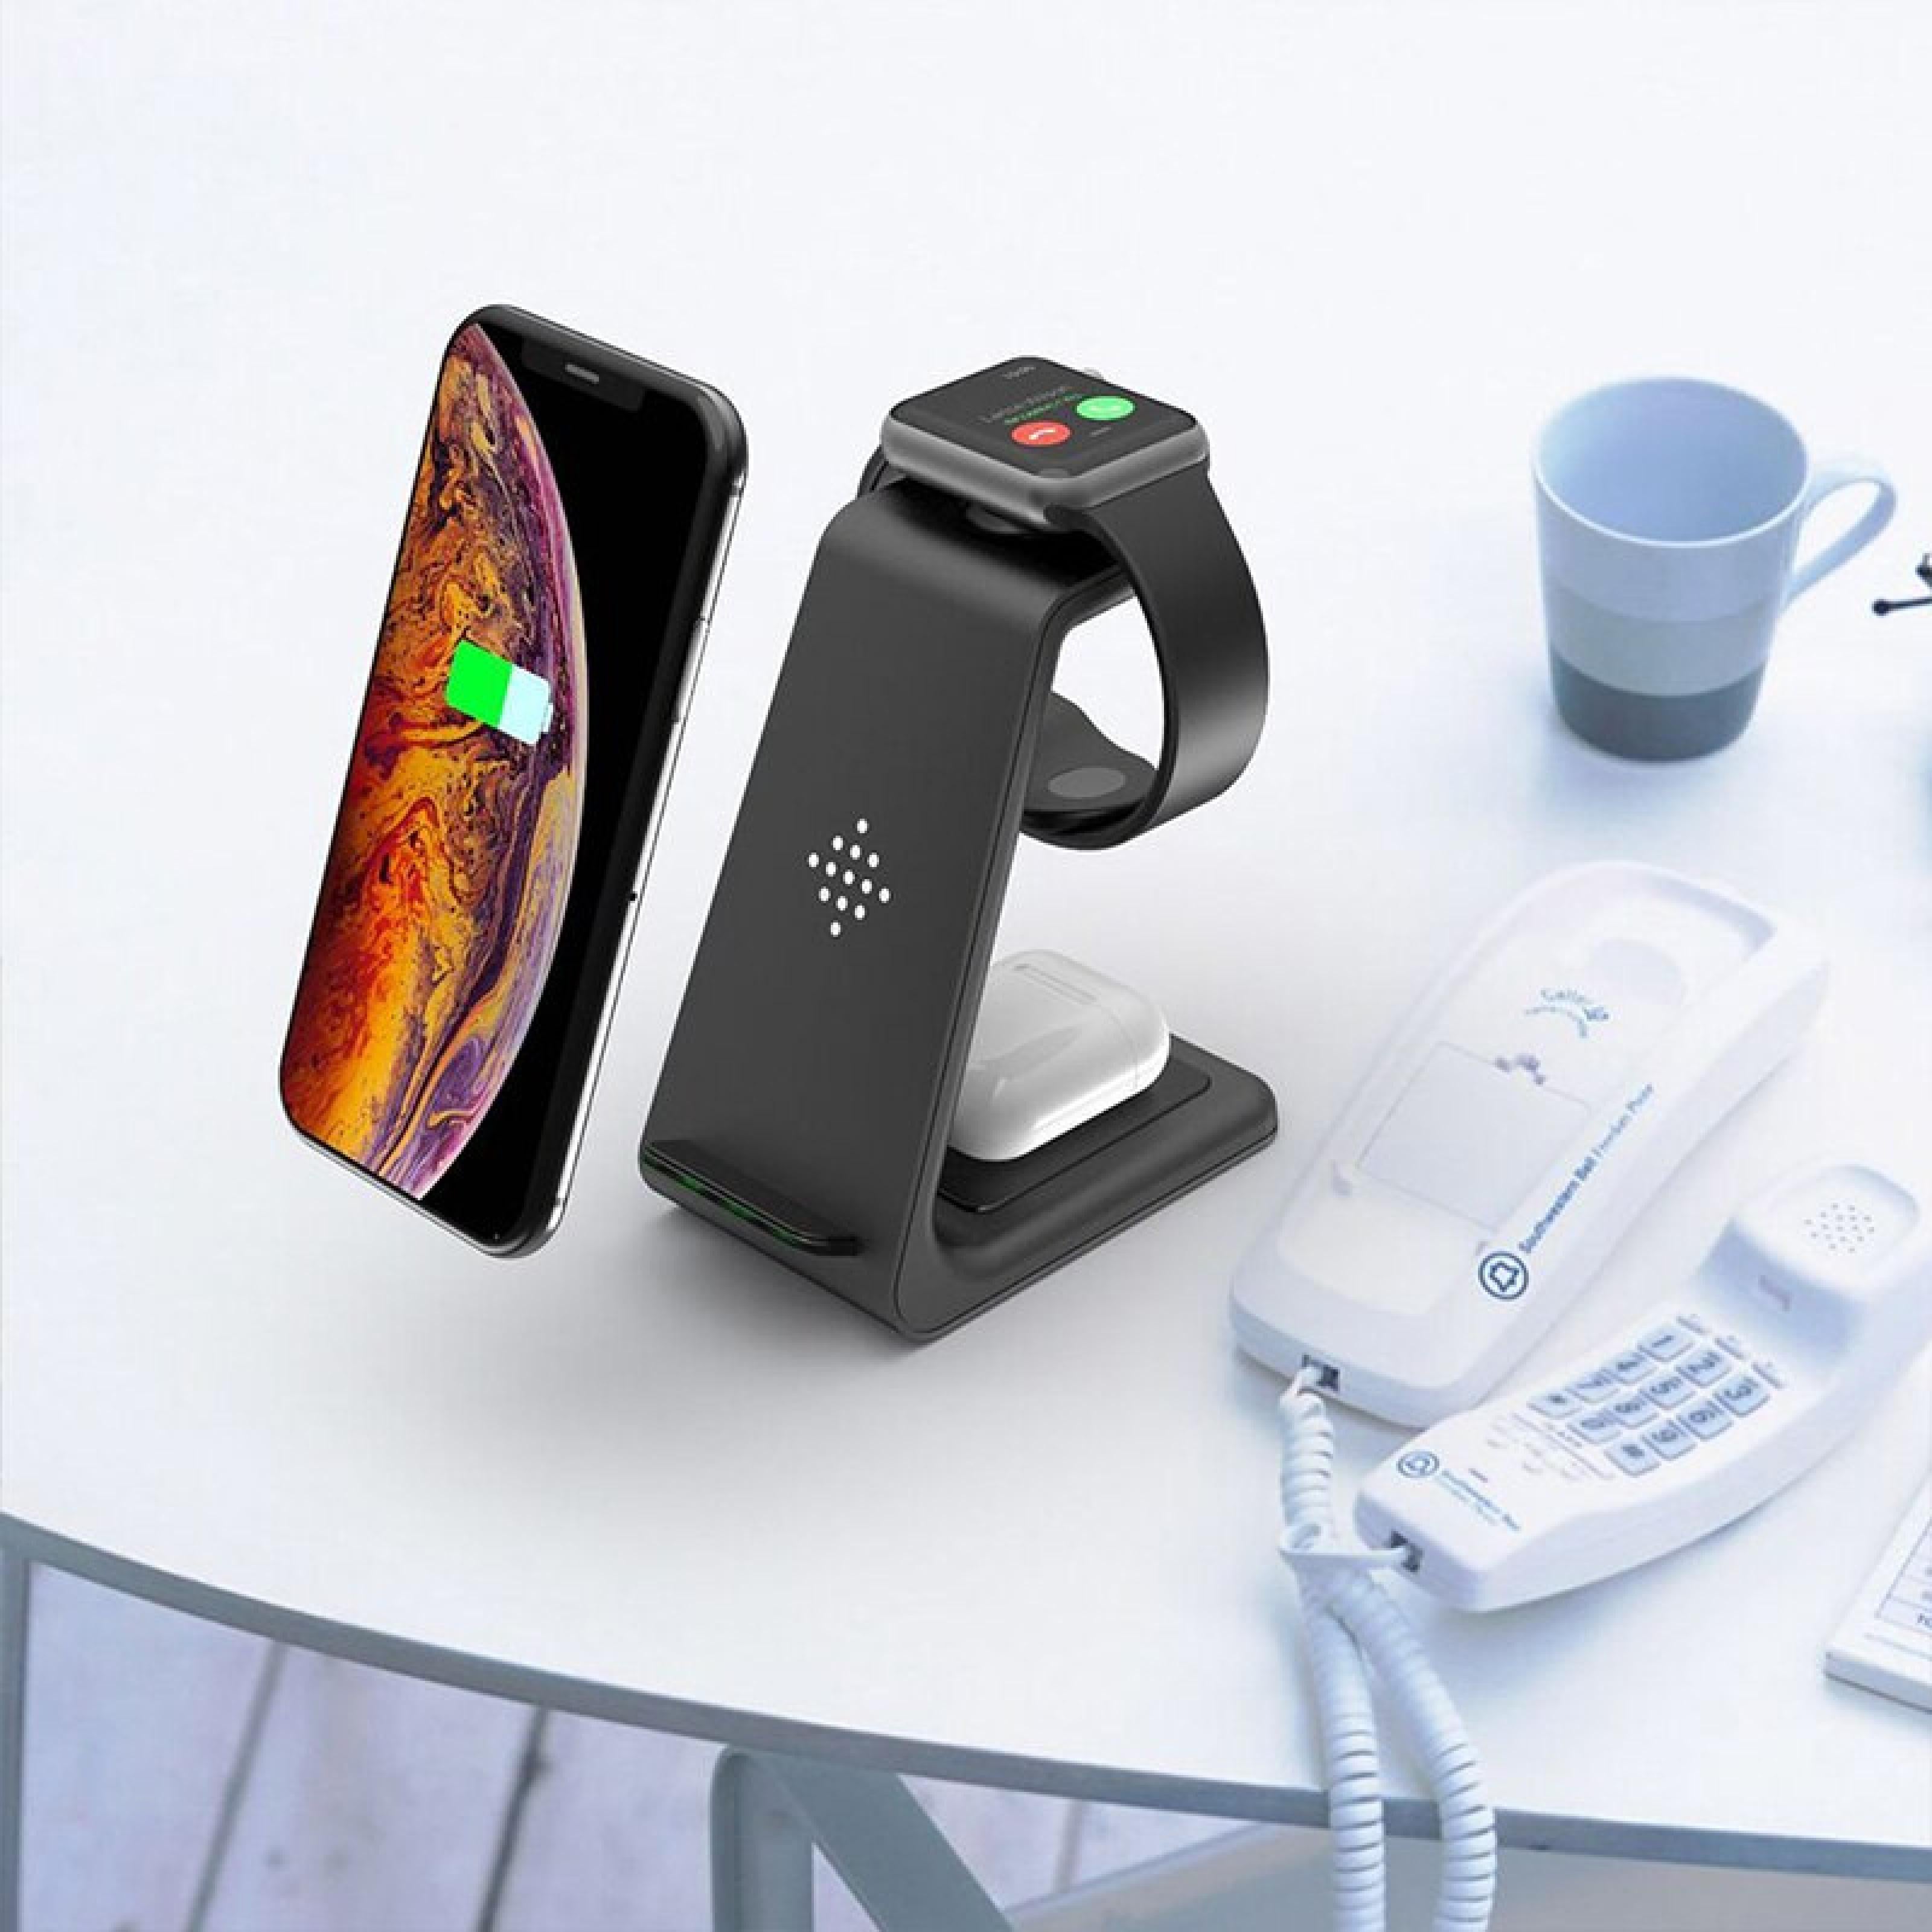 3-in-1 wireless charging station